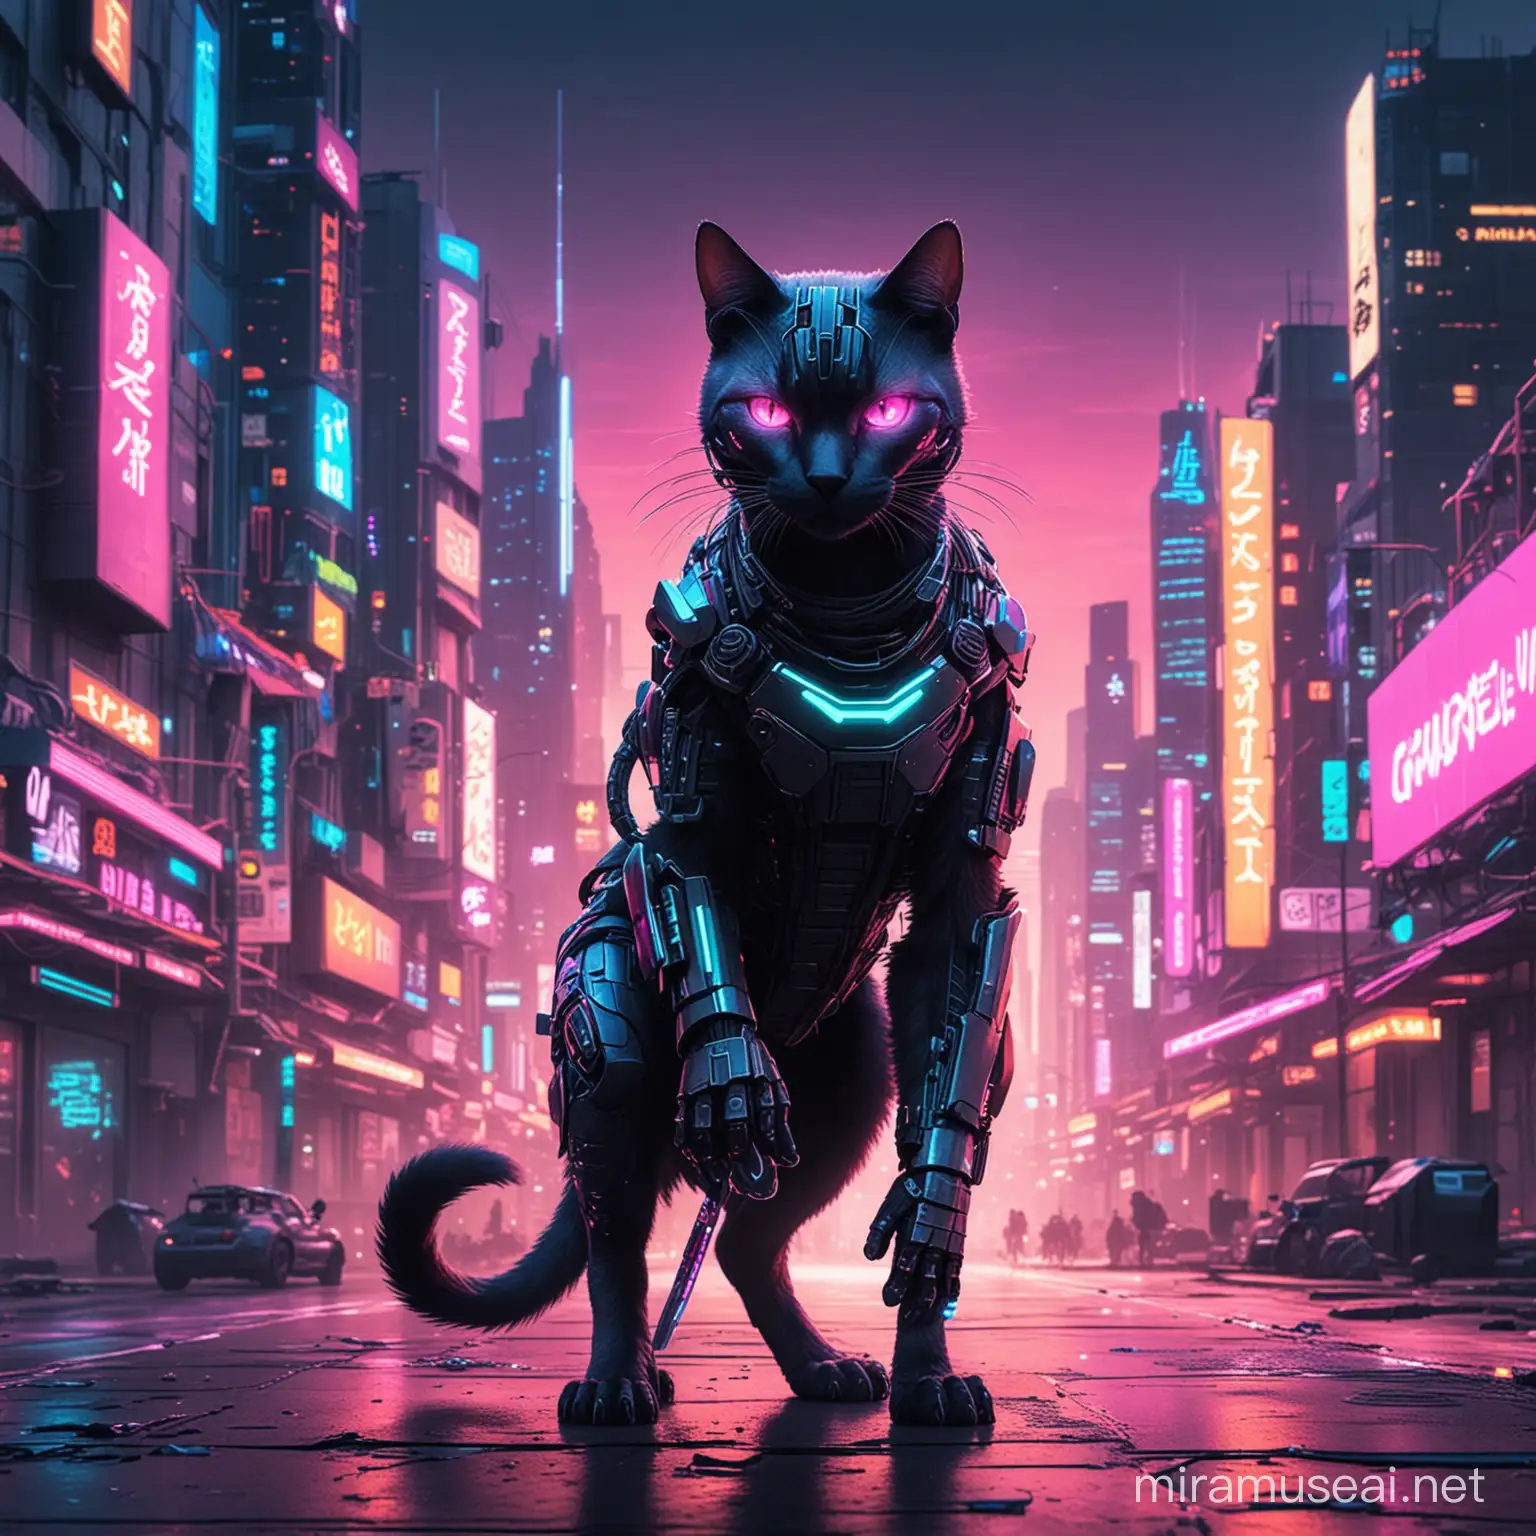 a cybernetic ninja cat in a futuristic city with neon glow